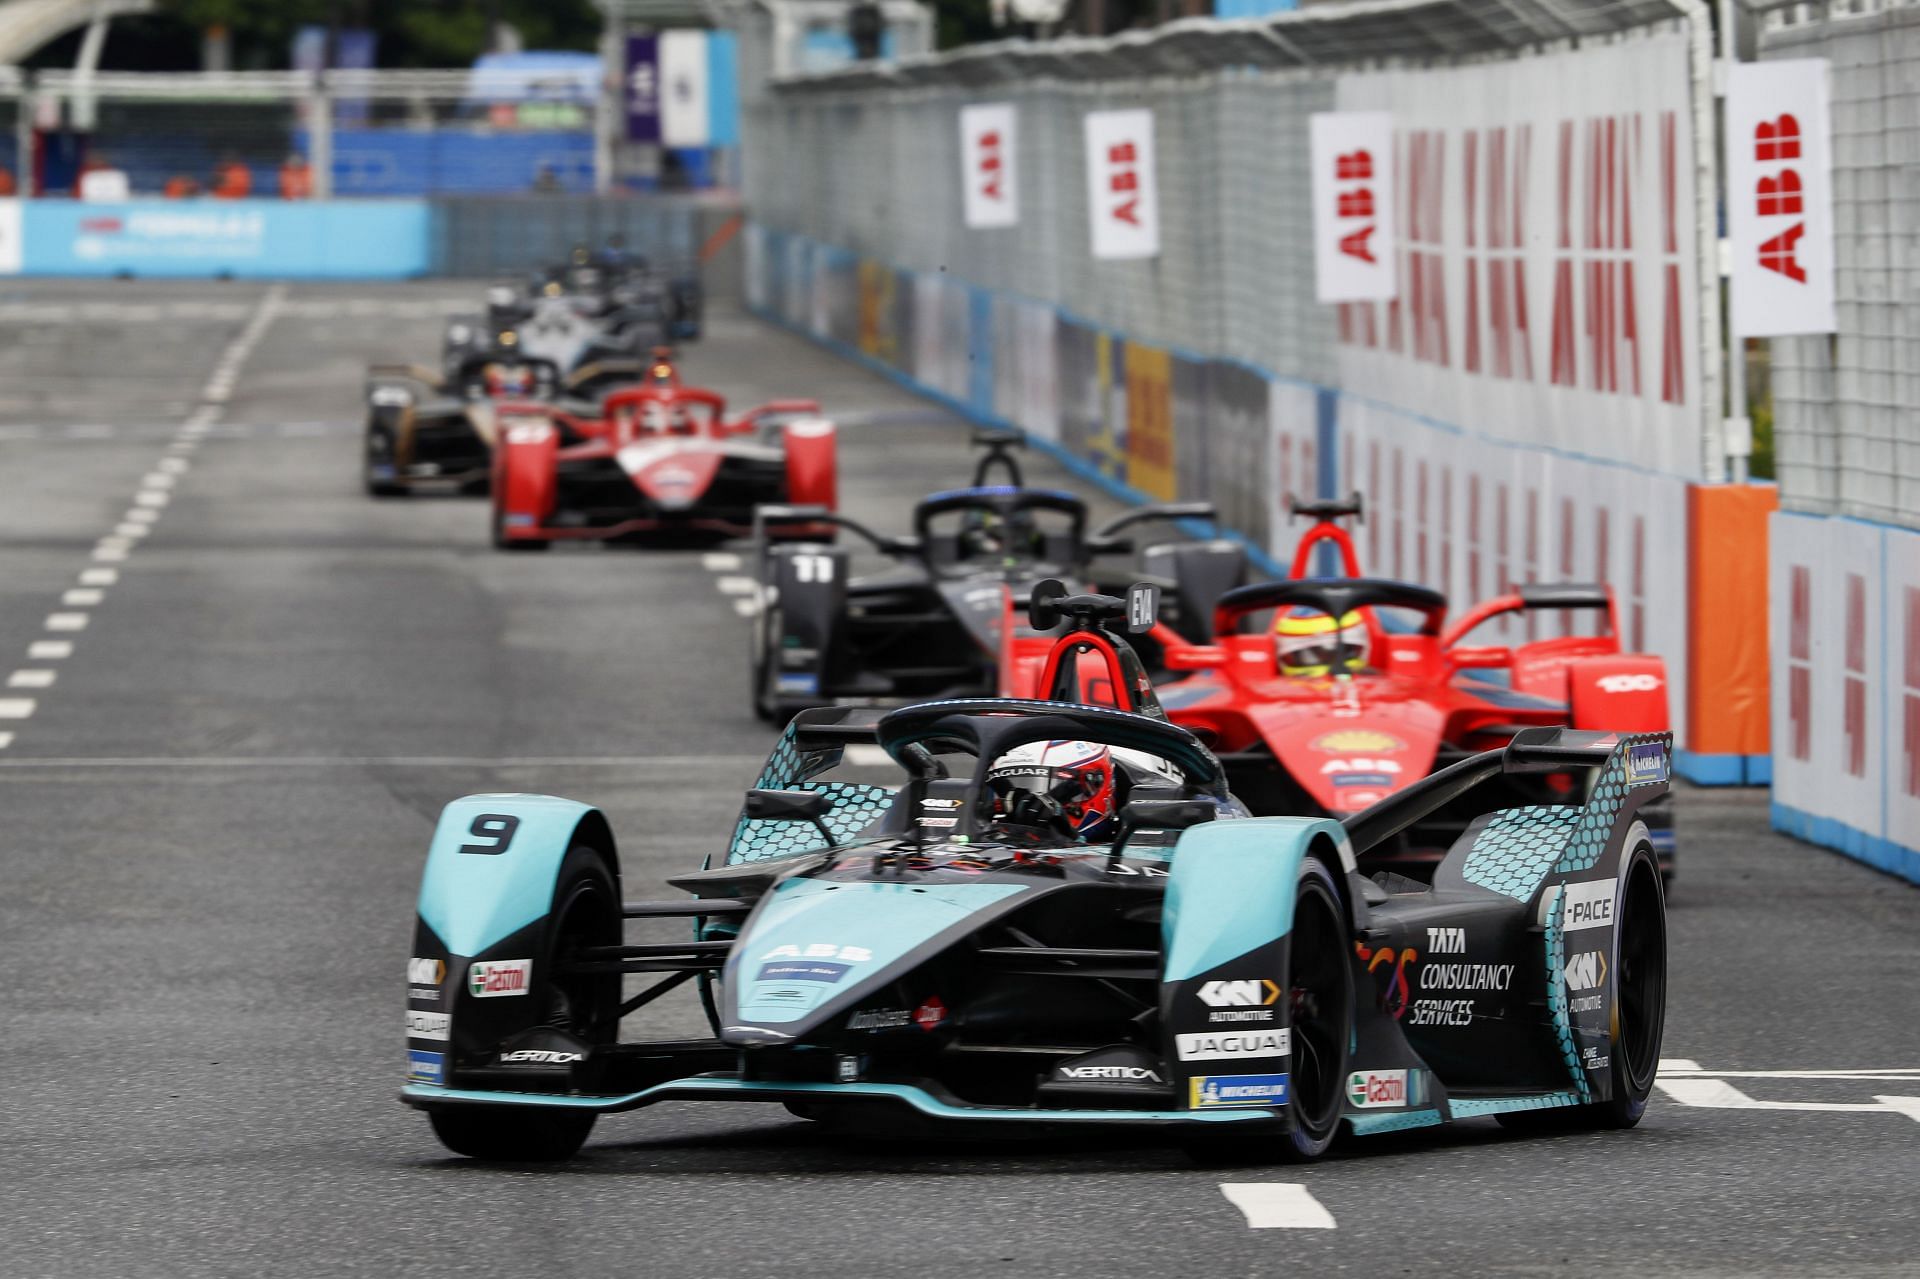 2023 Formula E Hyderabad EPrix Dates, schedule, ticket prices, how to buy tickets, and more